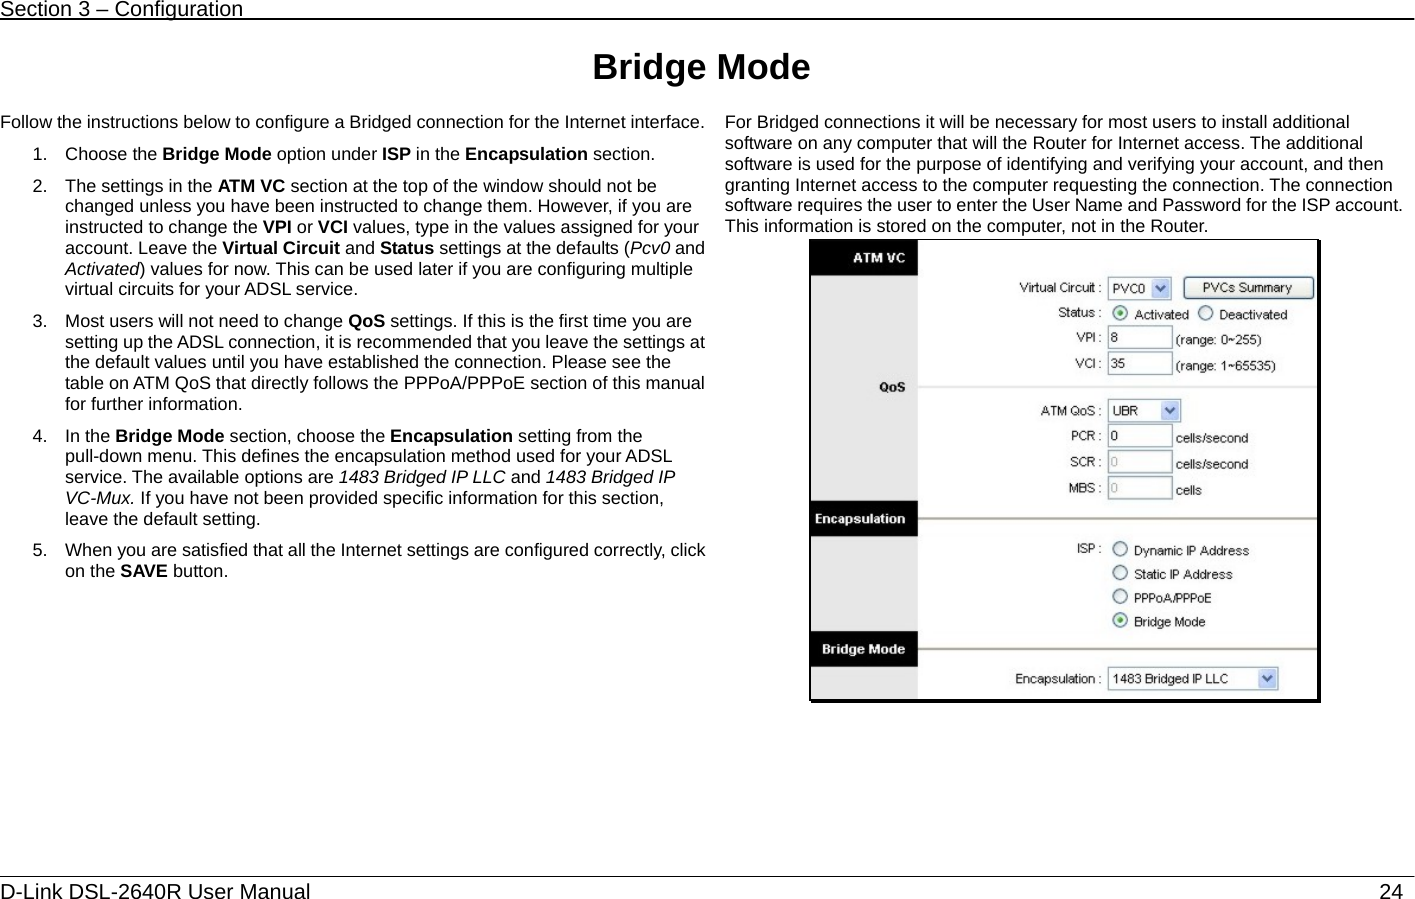 Section 3 – Configuration   D-Link DSL-2640R User Manual                           24Bridge Mode  Follow the instructions below to configure a Bridged connection for the Internet interface. 1. Choose the Bridge Mode option under ISP in the Encapsulation section. 2.  The settings in the ATM VC section at the top of the window should not be changed unless you have been instructed to change them. However, if you are instructed to change the VPI or VCI values, type in the values assigned for your account. Leave the Virtual Circuit and Status settings at the defaults (Pcv0 and Activated) values for now. This can be used later if you are configuring multiple virtual circuits for your ADSL service.   3.  Most users will not need to change QoS settings. If this is the first time you are setting up the ADSL connection, it is recommended that you leave the settings at the default values until you have established the connection. Please see the table on ATM QoS that directly follows the PPPoA/PPPoE section of this manual for further information.     4. In the Bridge Mode section, choose the Encapsulation setting from the pull-down menu. This defines the encapsulation method used for your ADSL service. The available options are 1483 Bridged IP LLC and 1483 Bridged IP VC-Mux. If you have not been provided specific information for this section, leave the default setting.   5.  When you are satisfied that all the Internet settings are configured correctly, click on the SAVE button.  For Bridged connections it will be necessary for most users to install additional software on any computer that will the Router for Internet access. The additional software is used for the purpose of identifying and verifying your account, and then granting Internet access to the computer requesting the connection. The connection software requires the user to enter the User Name and Password for the ISP account. This information is stored on the computer, not in the Router.   